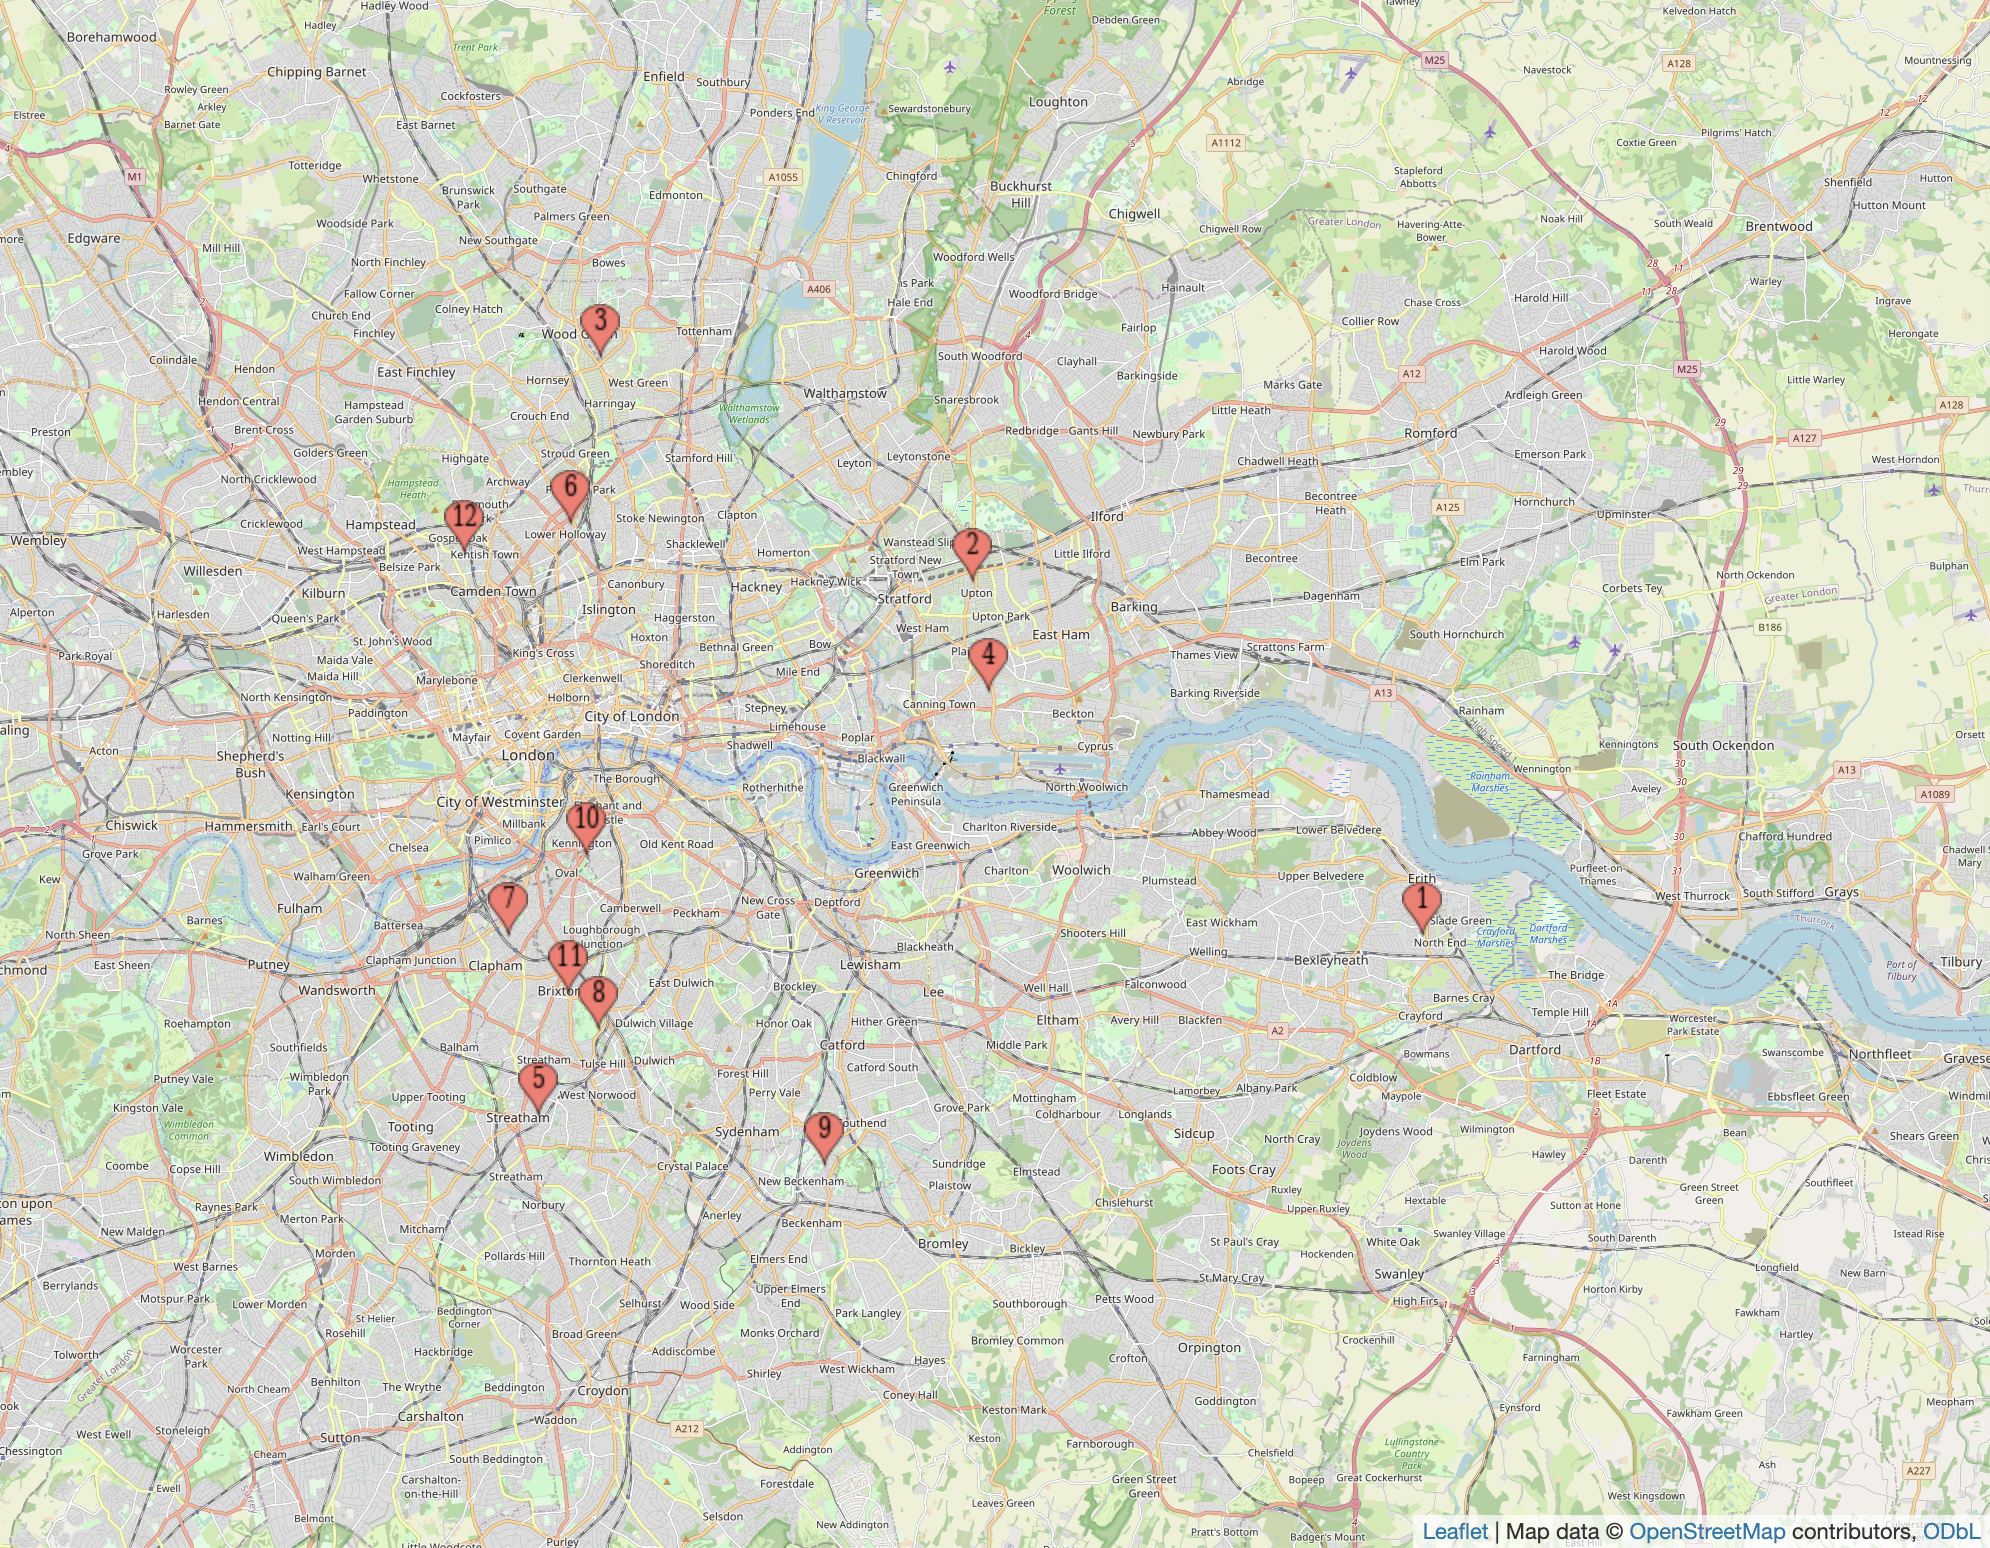 A map of London showing the locations of AVOCADO+ organisations' headquarters